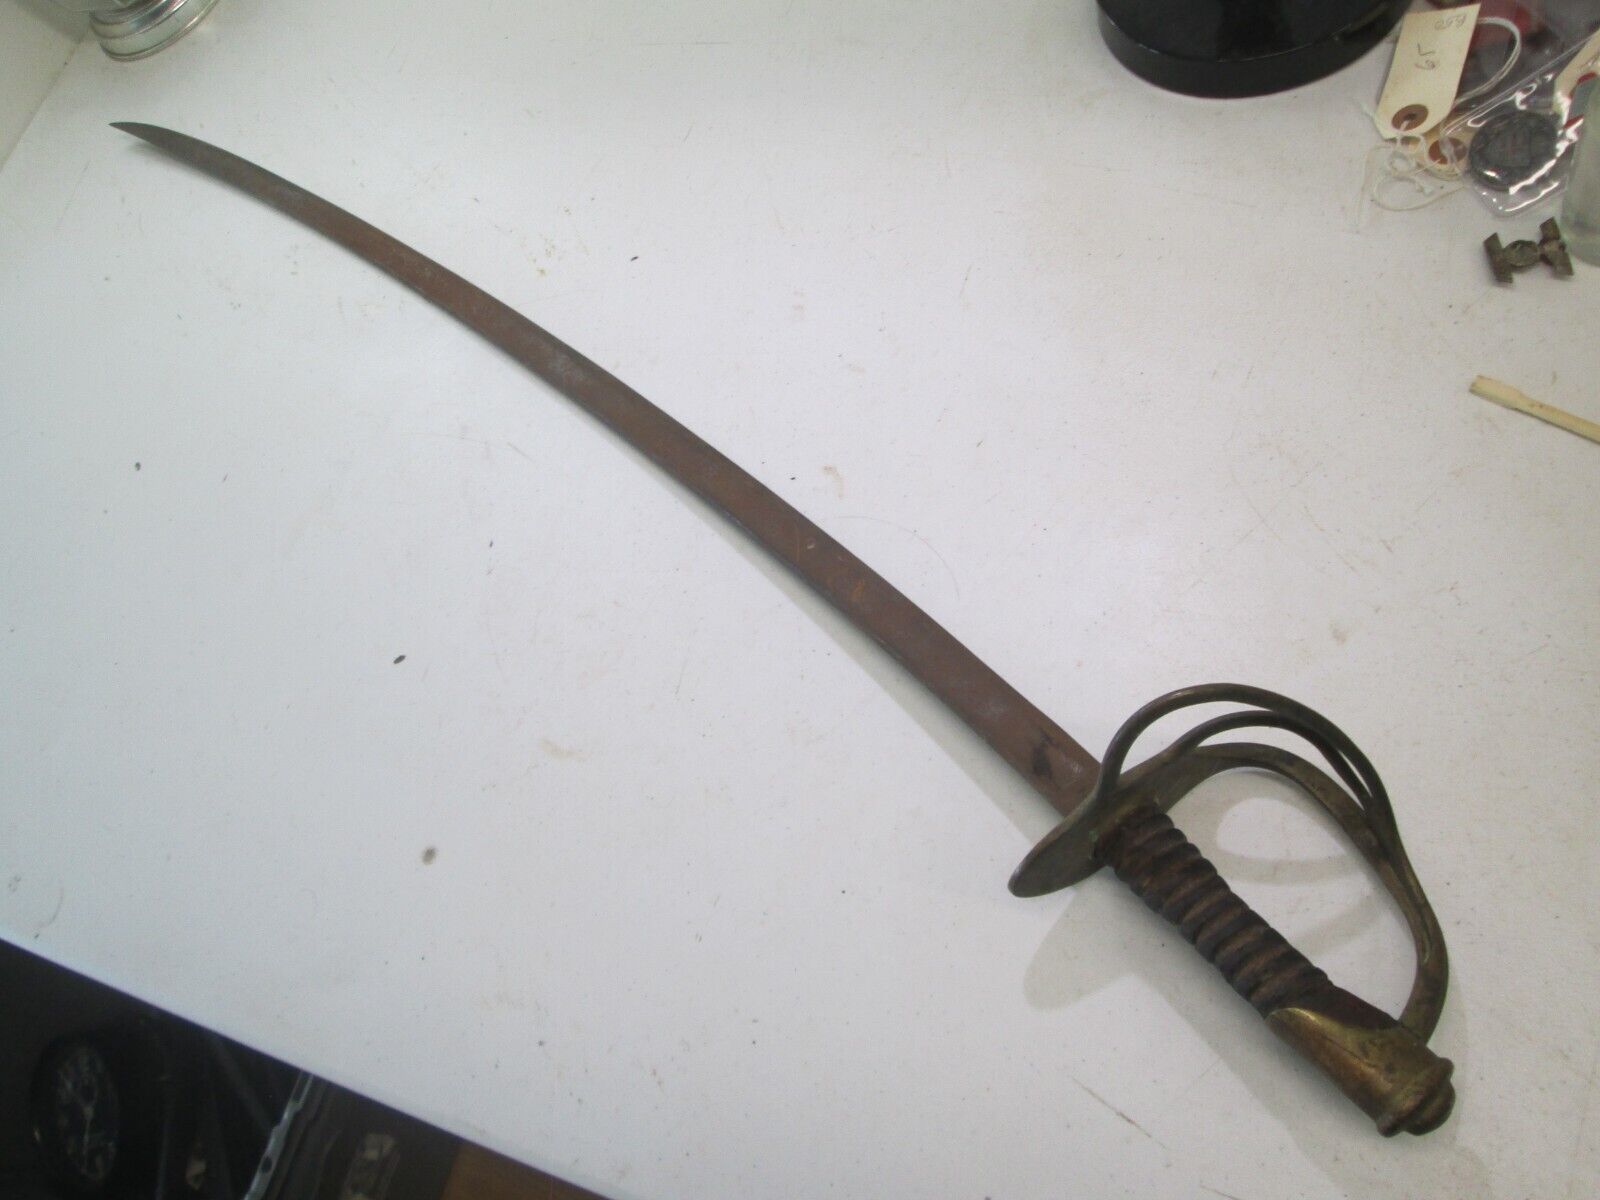 US CIVIL WAR CAVALRY SWORD NO SCABBARD DATED 1865 MANSFIELD & LAMB MARKED